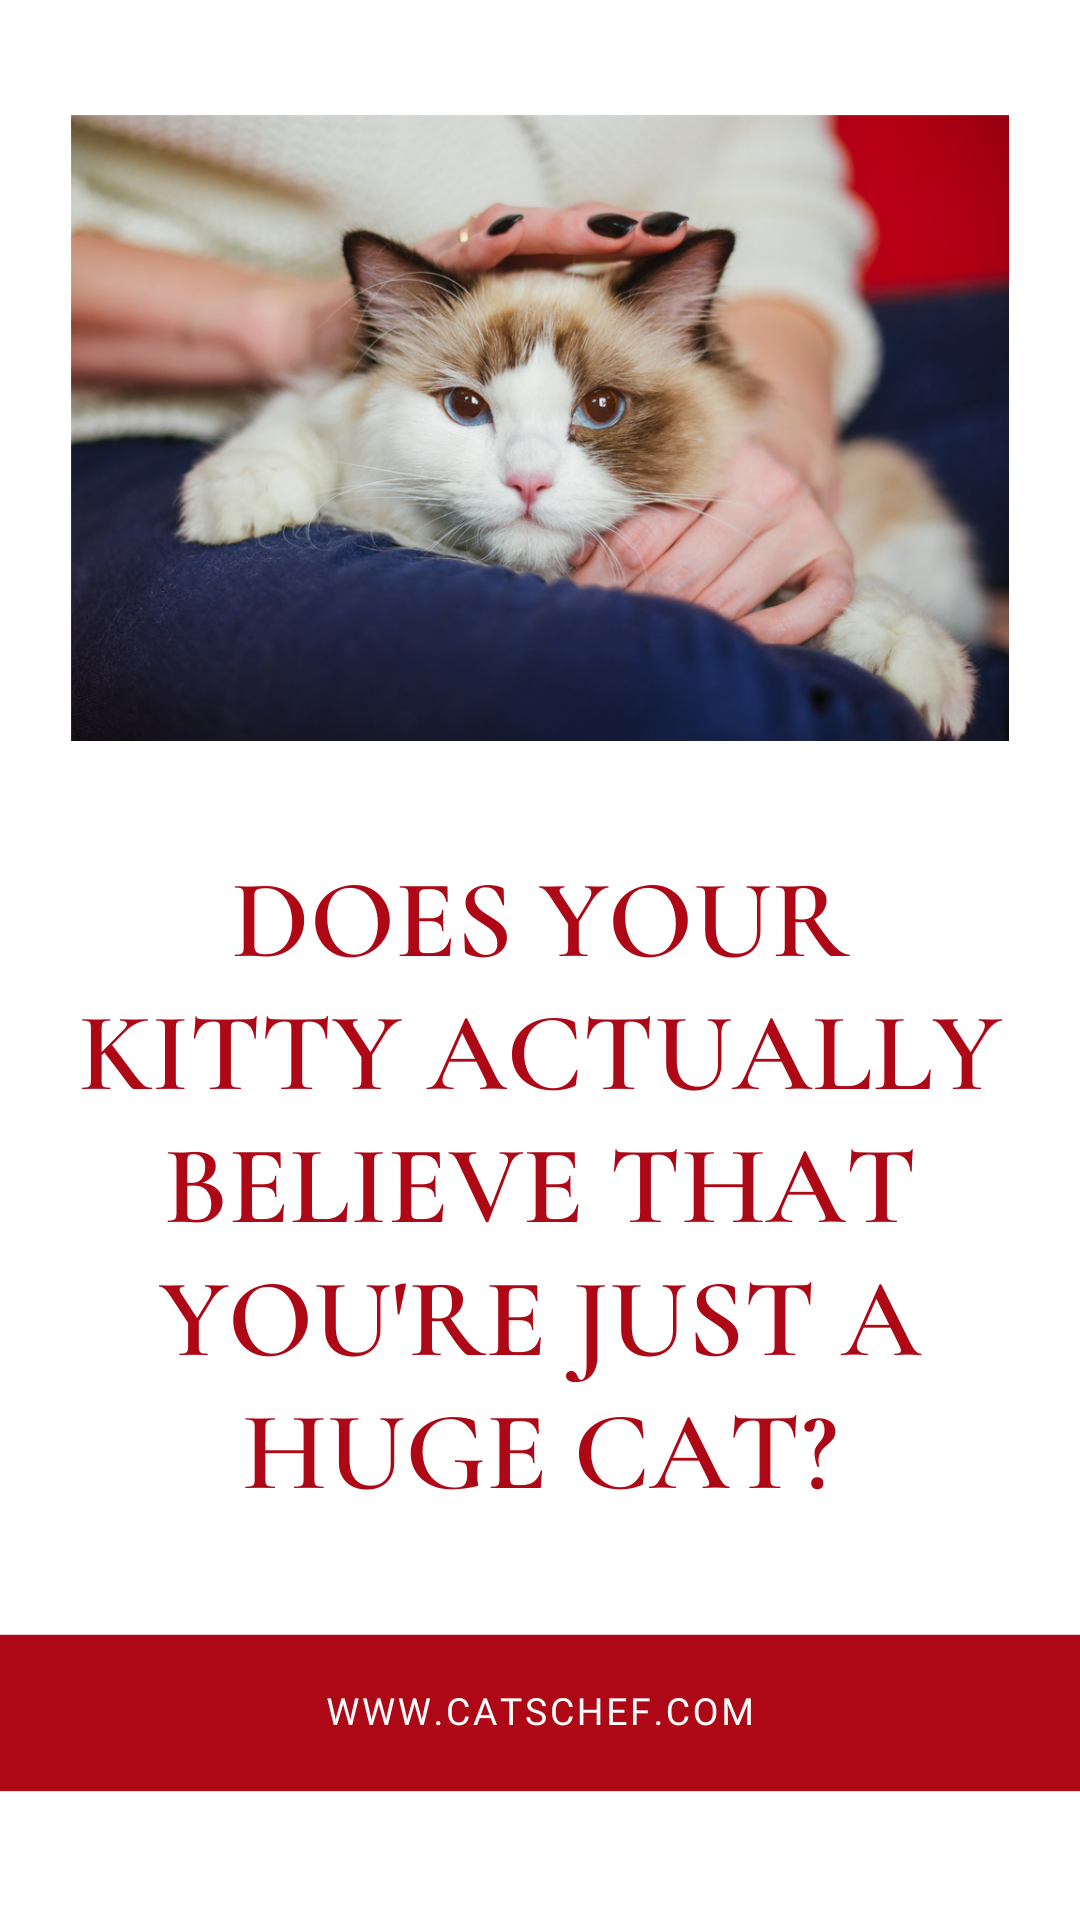 Does Your Kitty Actually Believe That You're Just A Huge Cat?